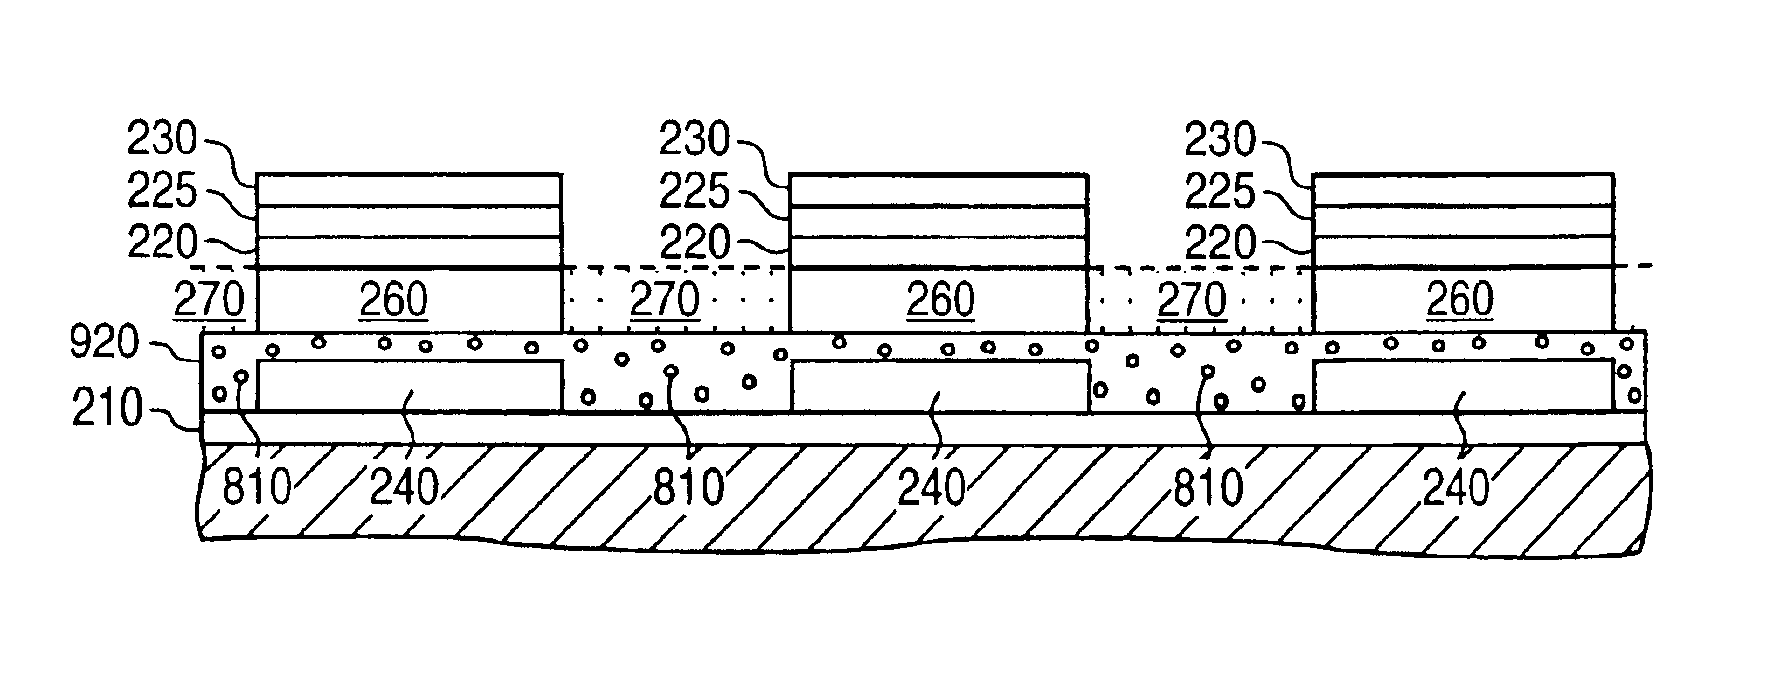 Magnetic shielding for reducing magnetic interference